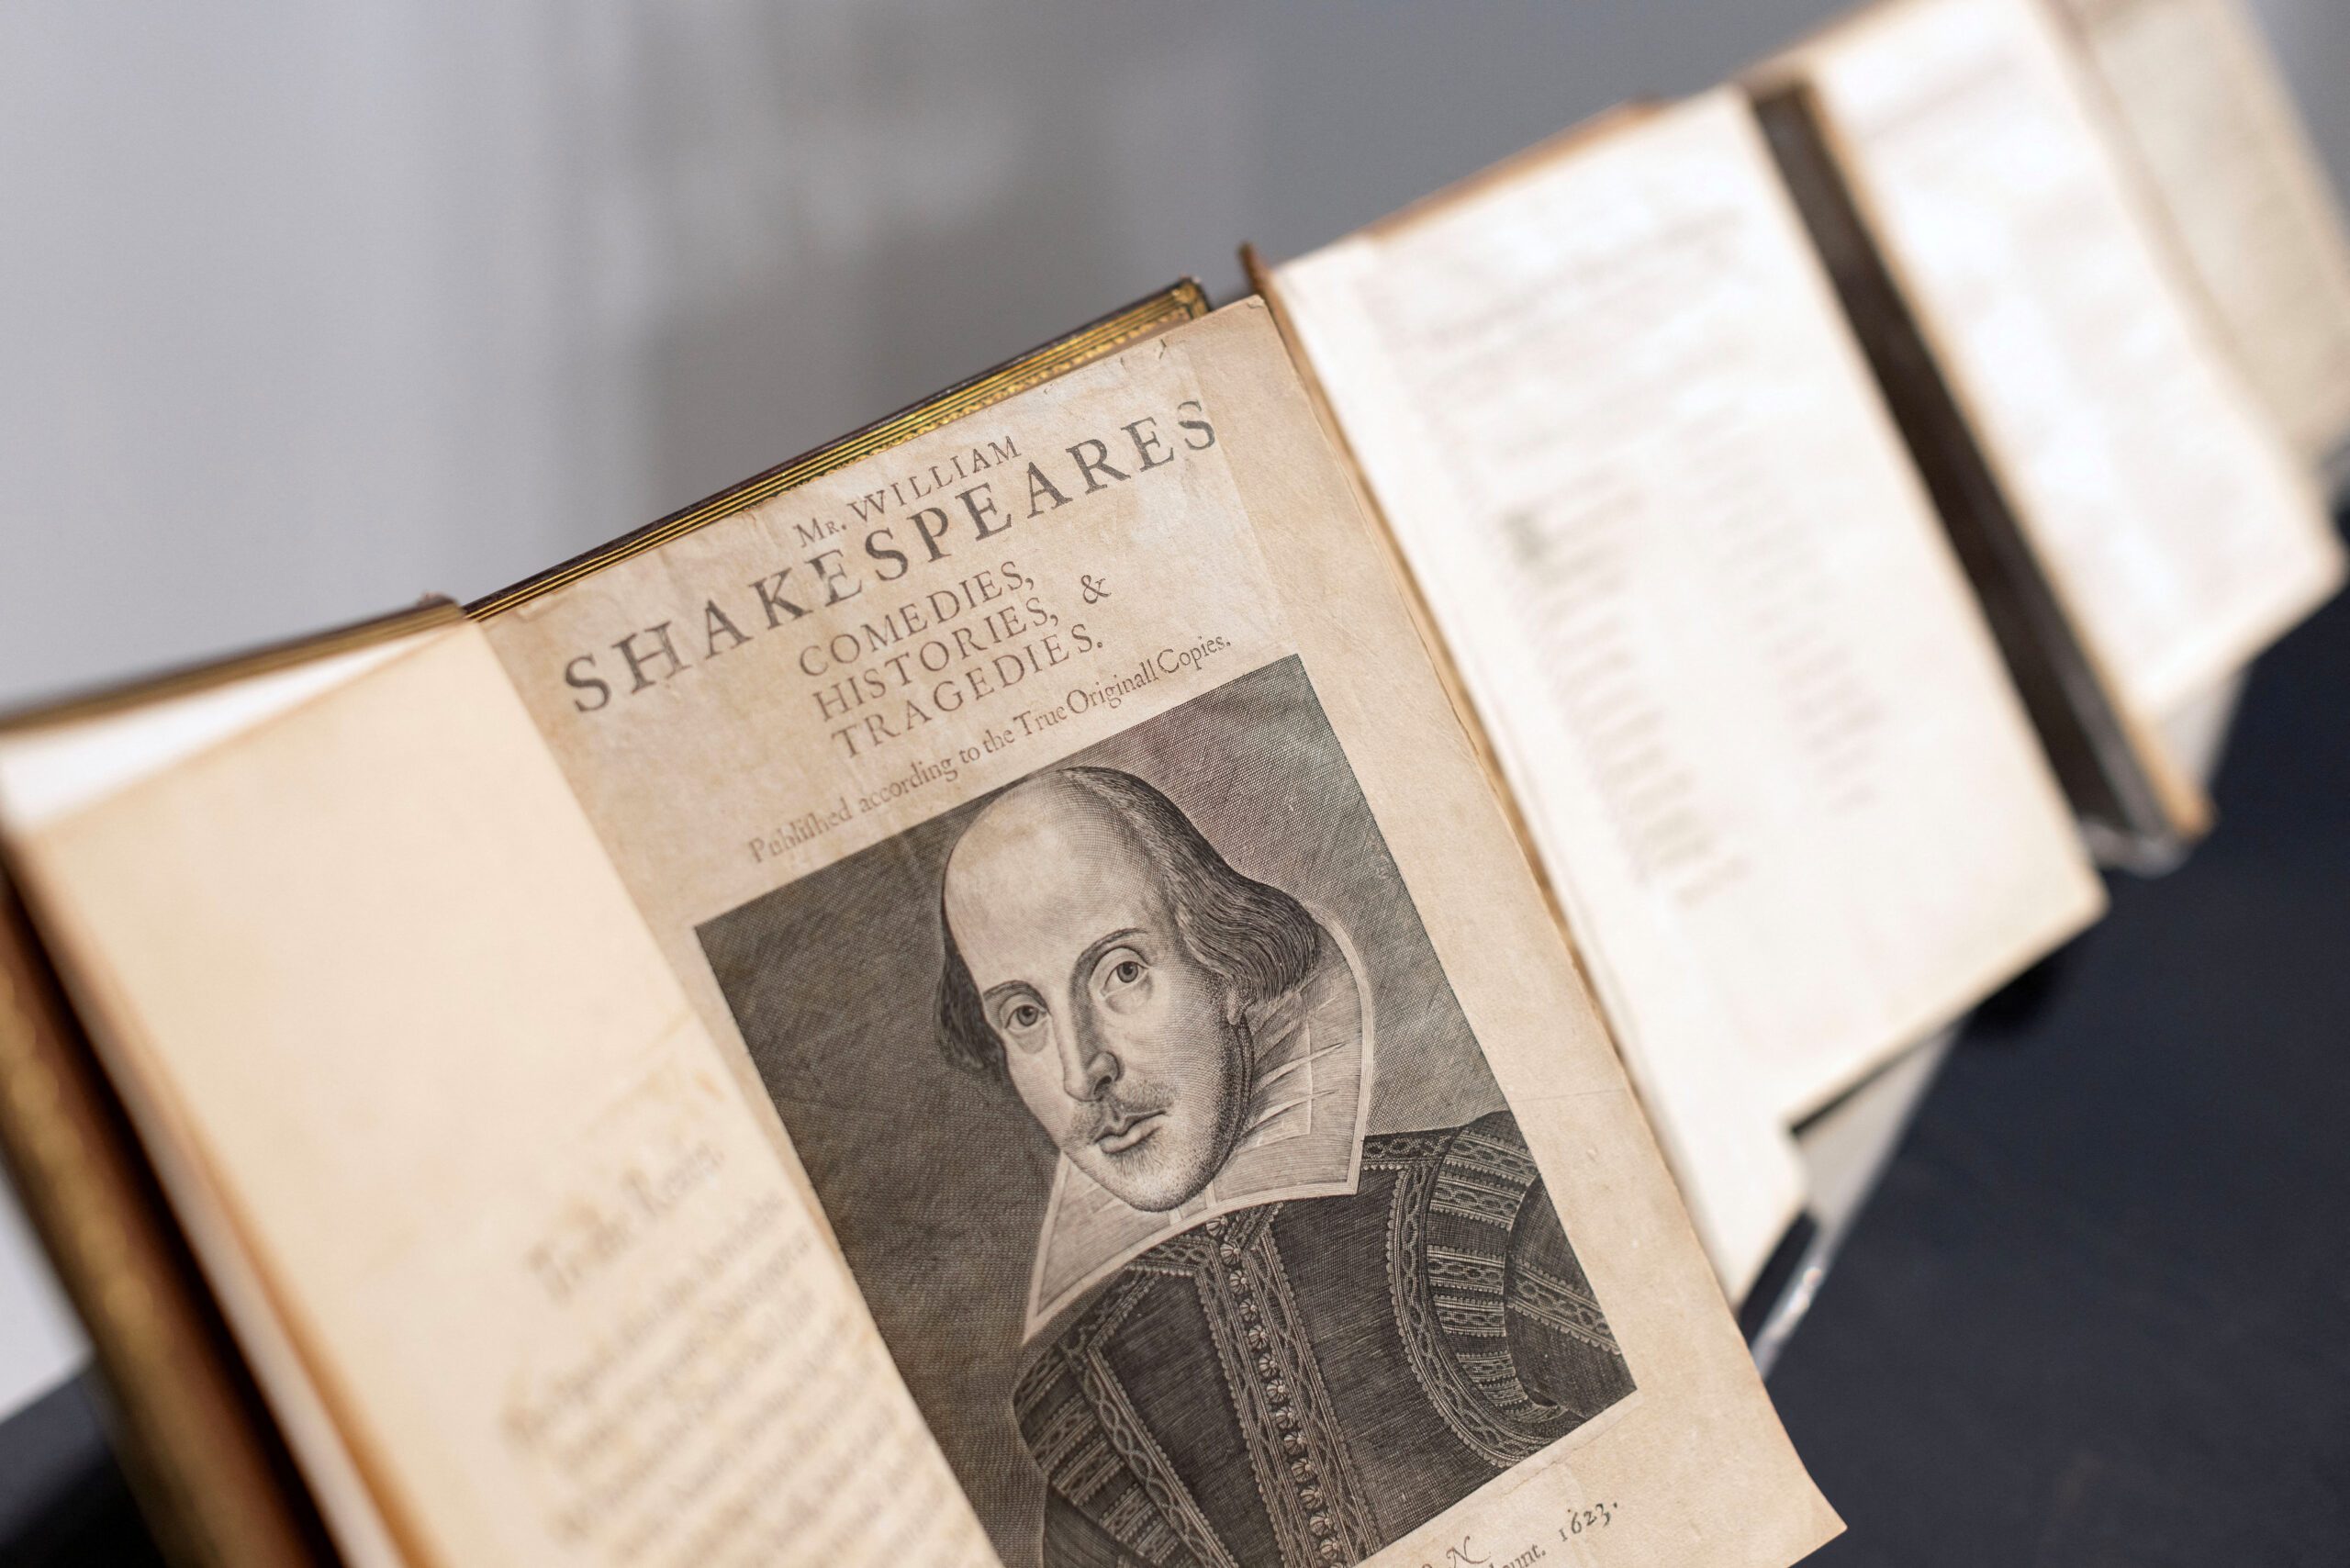 Rare outing for 6 Shakespeare’s First Folio copies in London